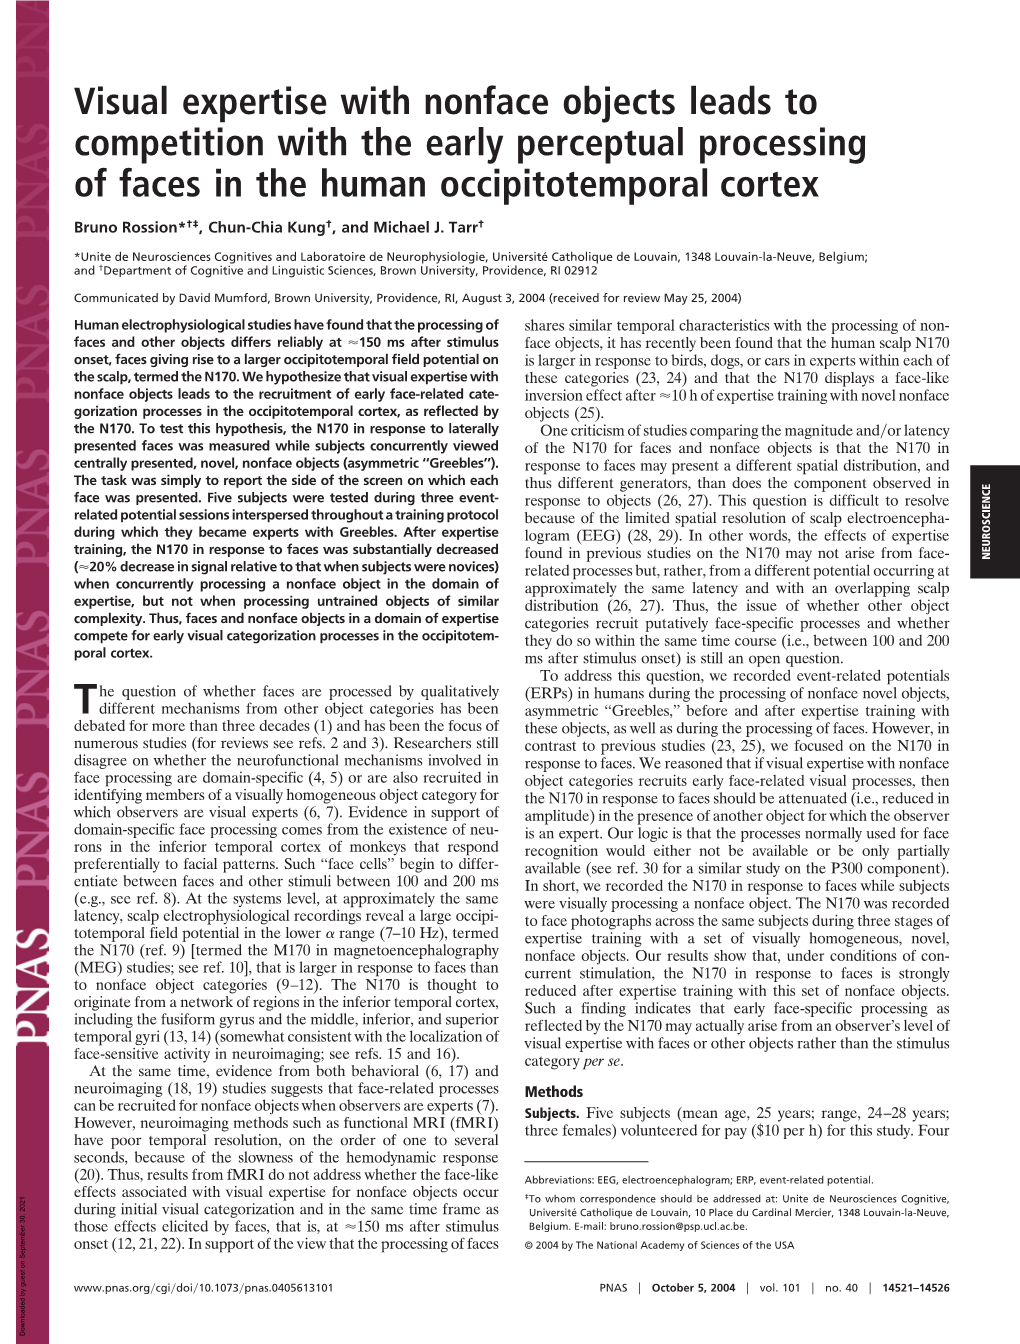 Visual Expertise with Nonface Objects Leads to Competition with the Early Perceptual Processing of Faces in the Human Occipitotemporal Cortex